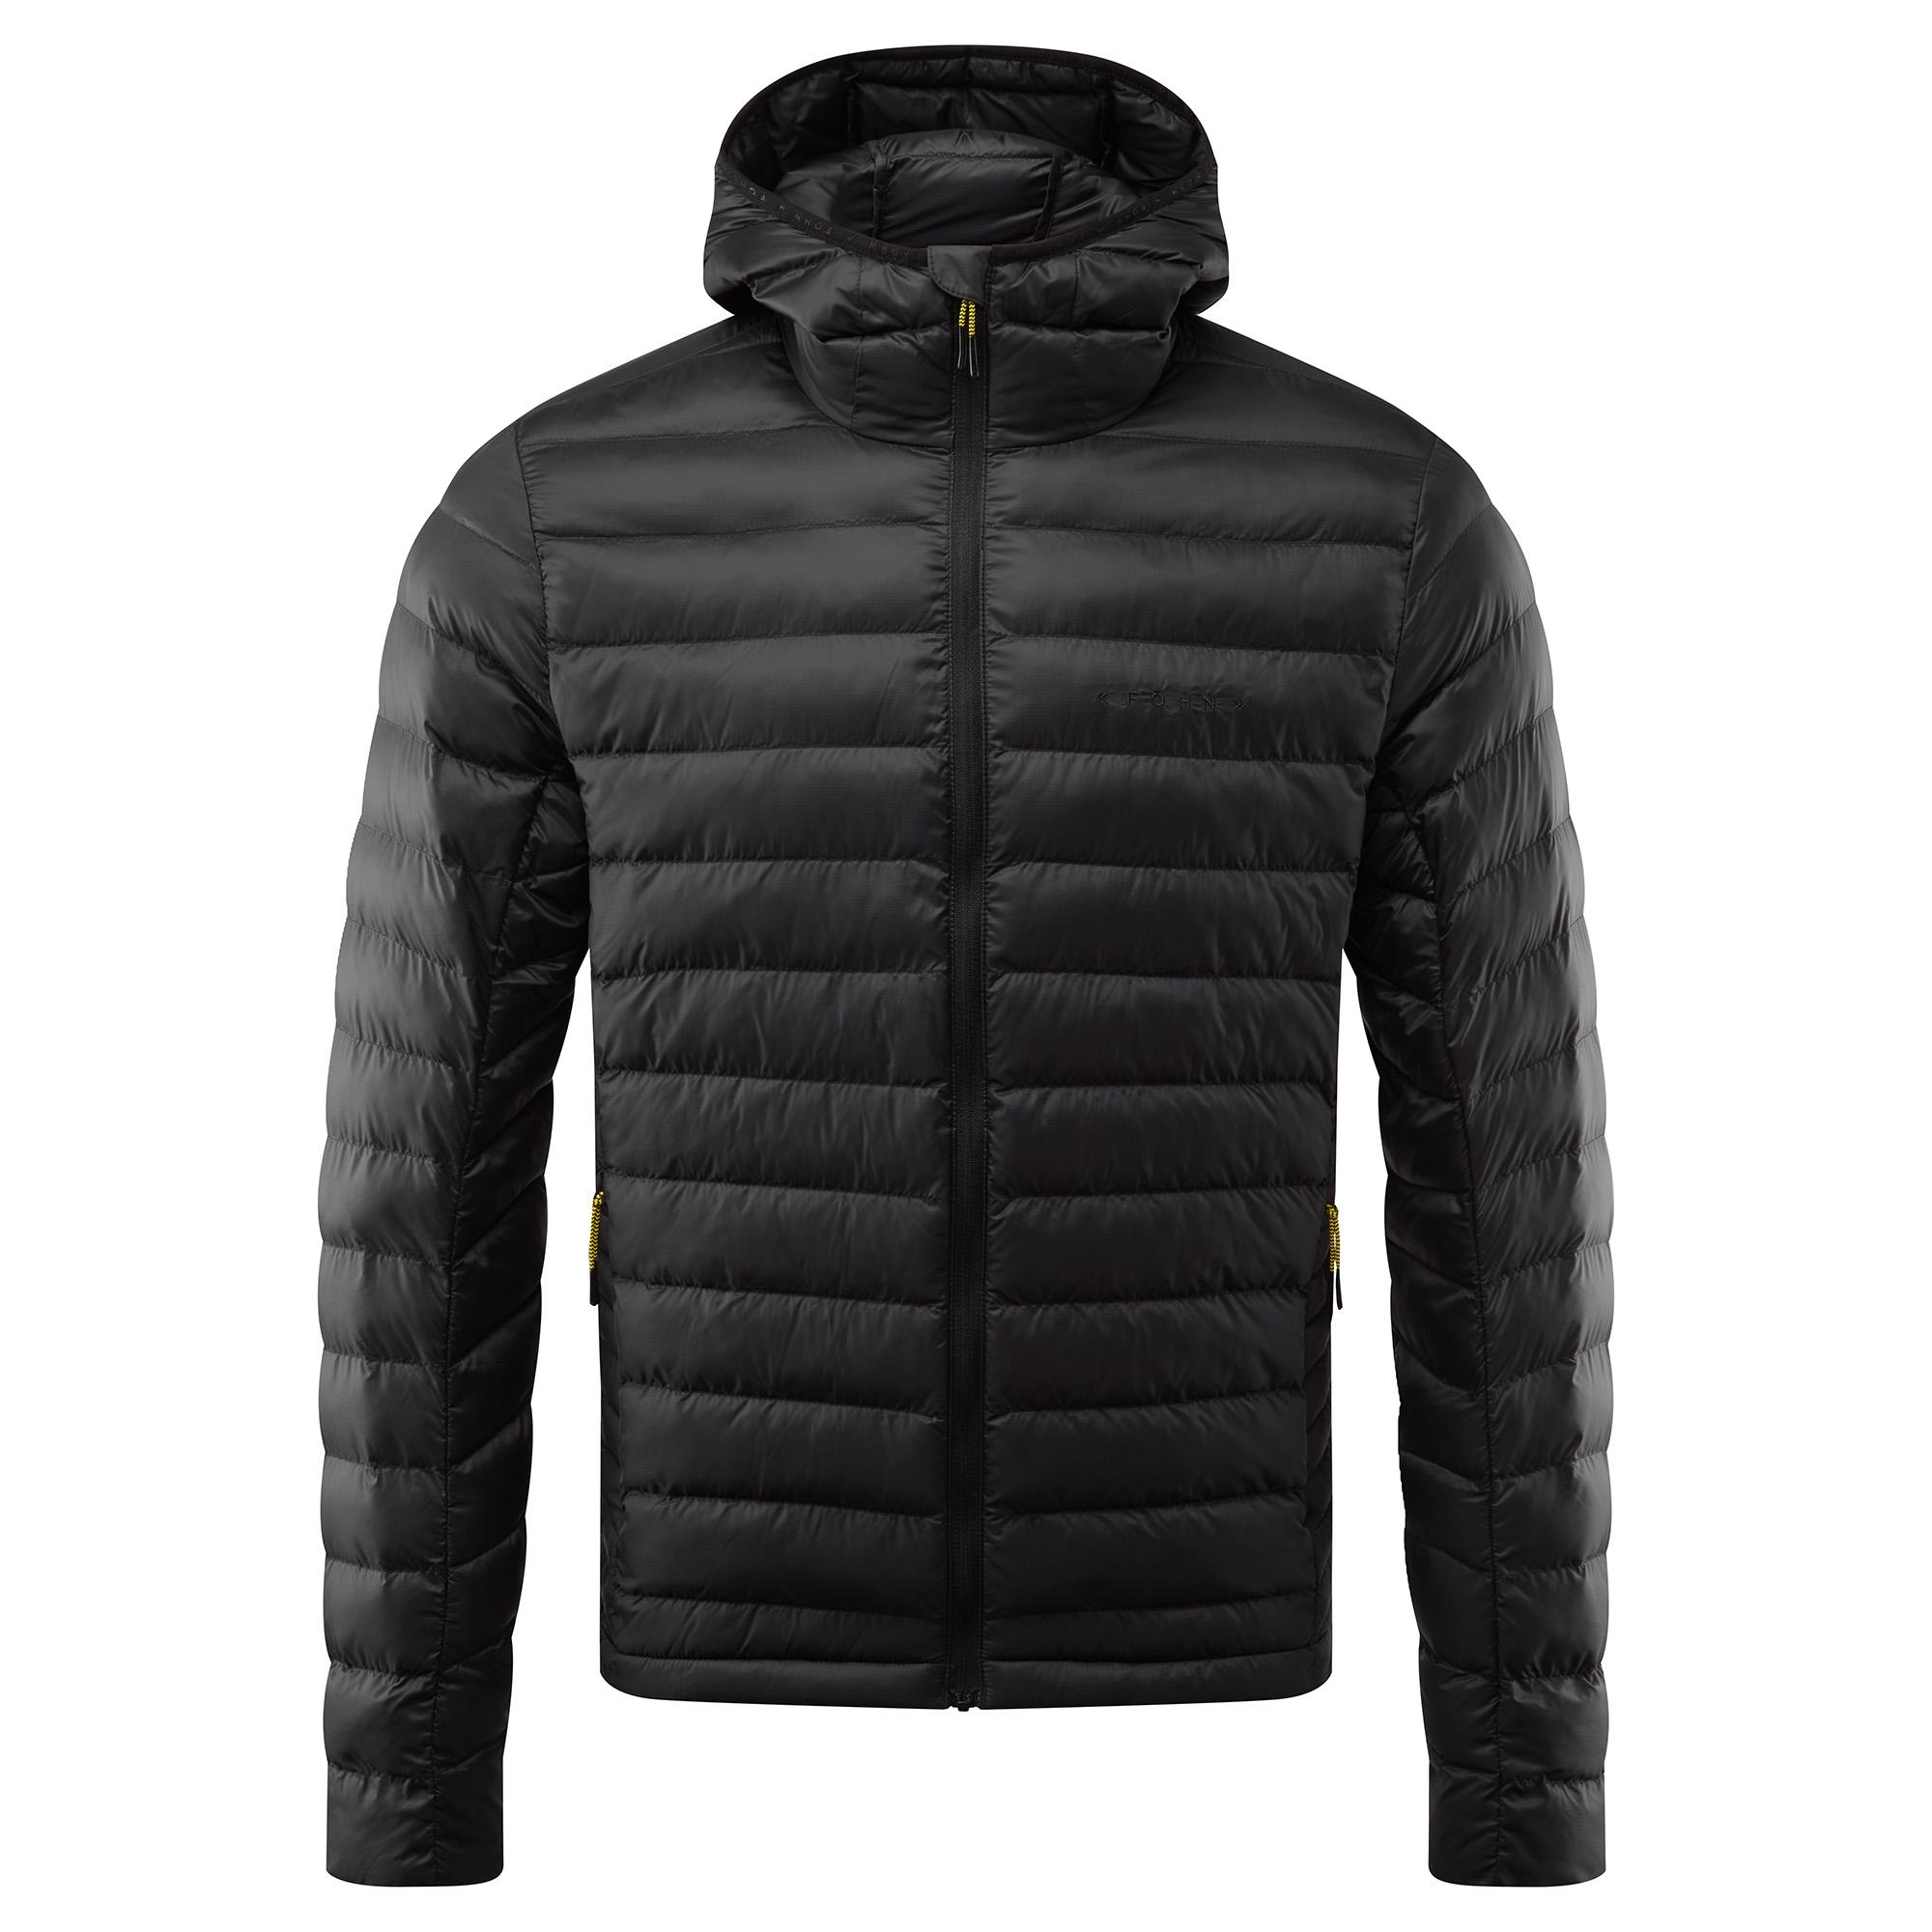 Fhn Mens Micro Synthetic Down Hooded Jacket - Black